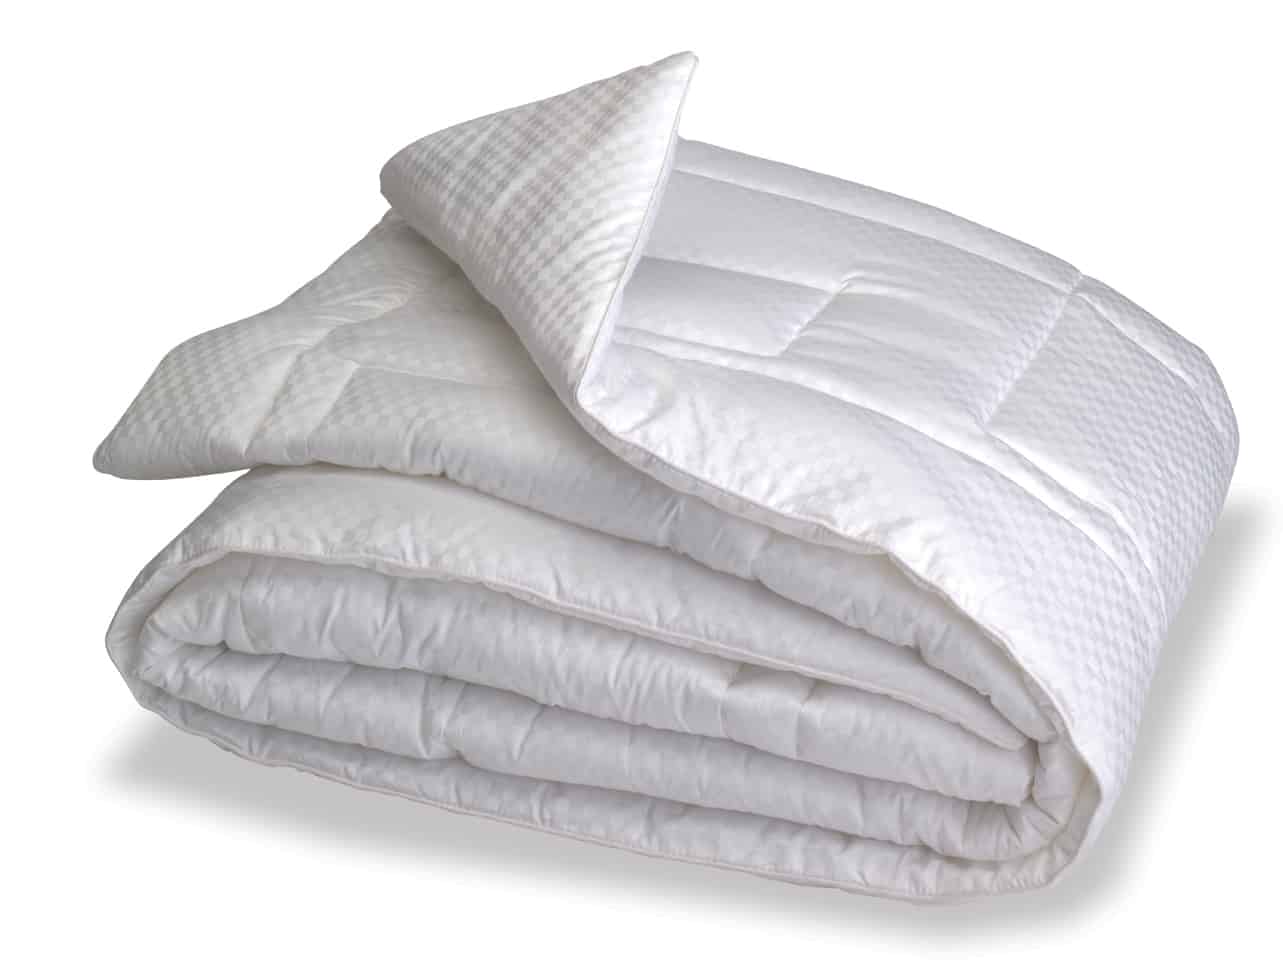 A picture of the nikken product dream comforter is part of a total Nikken naturest sleep system and is amazing.